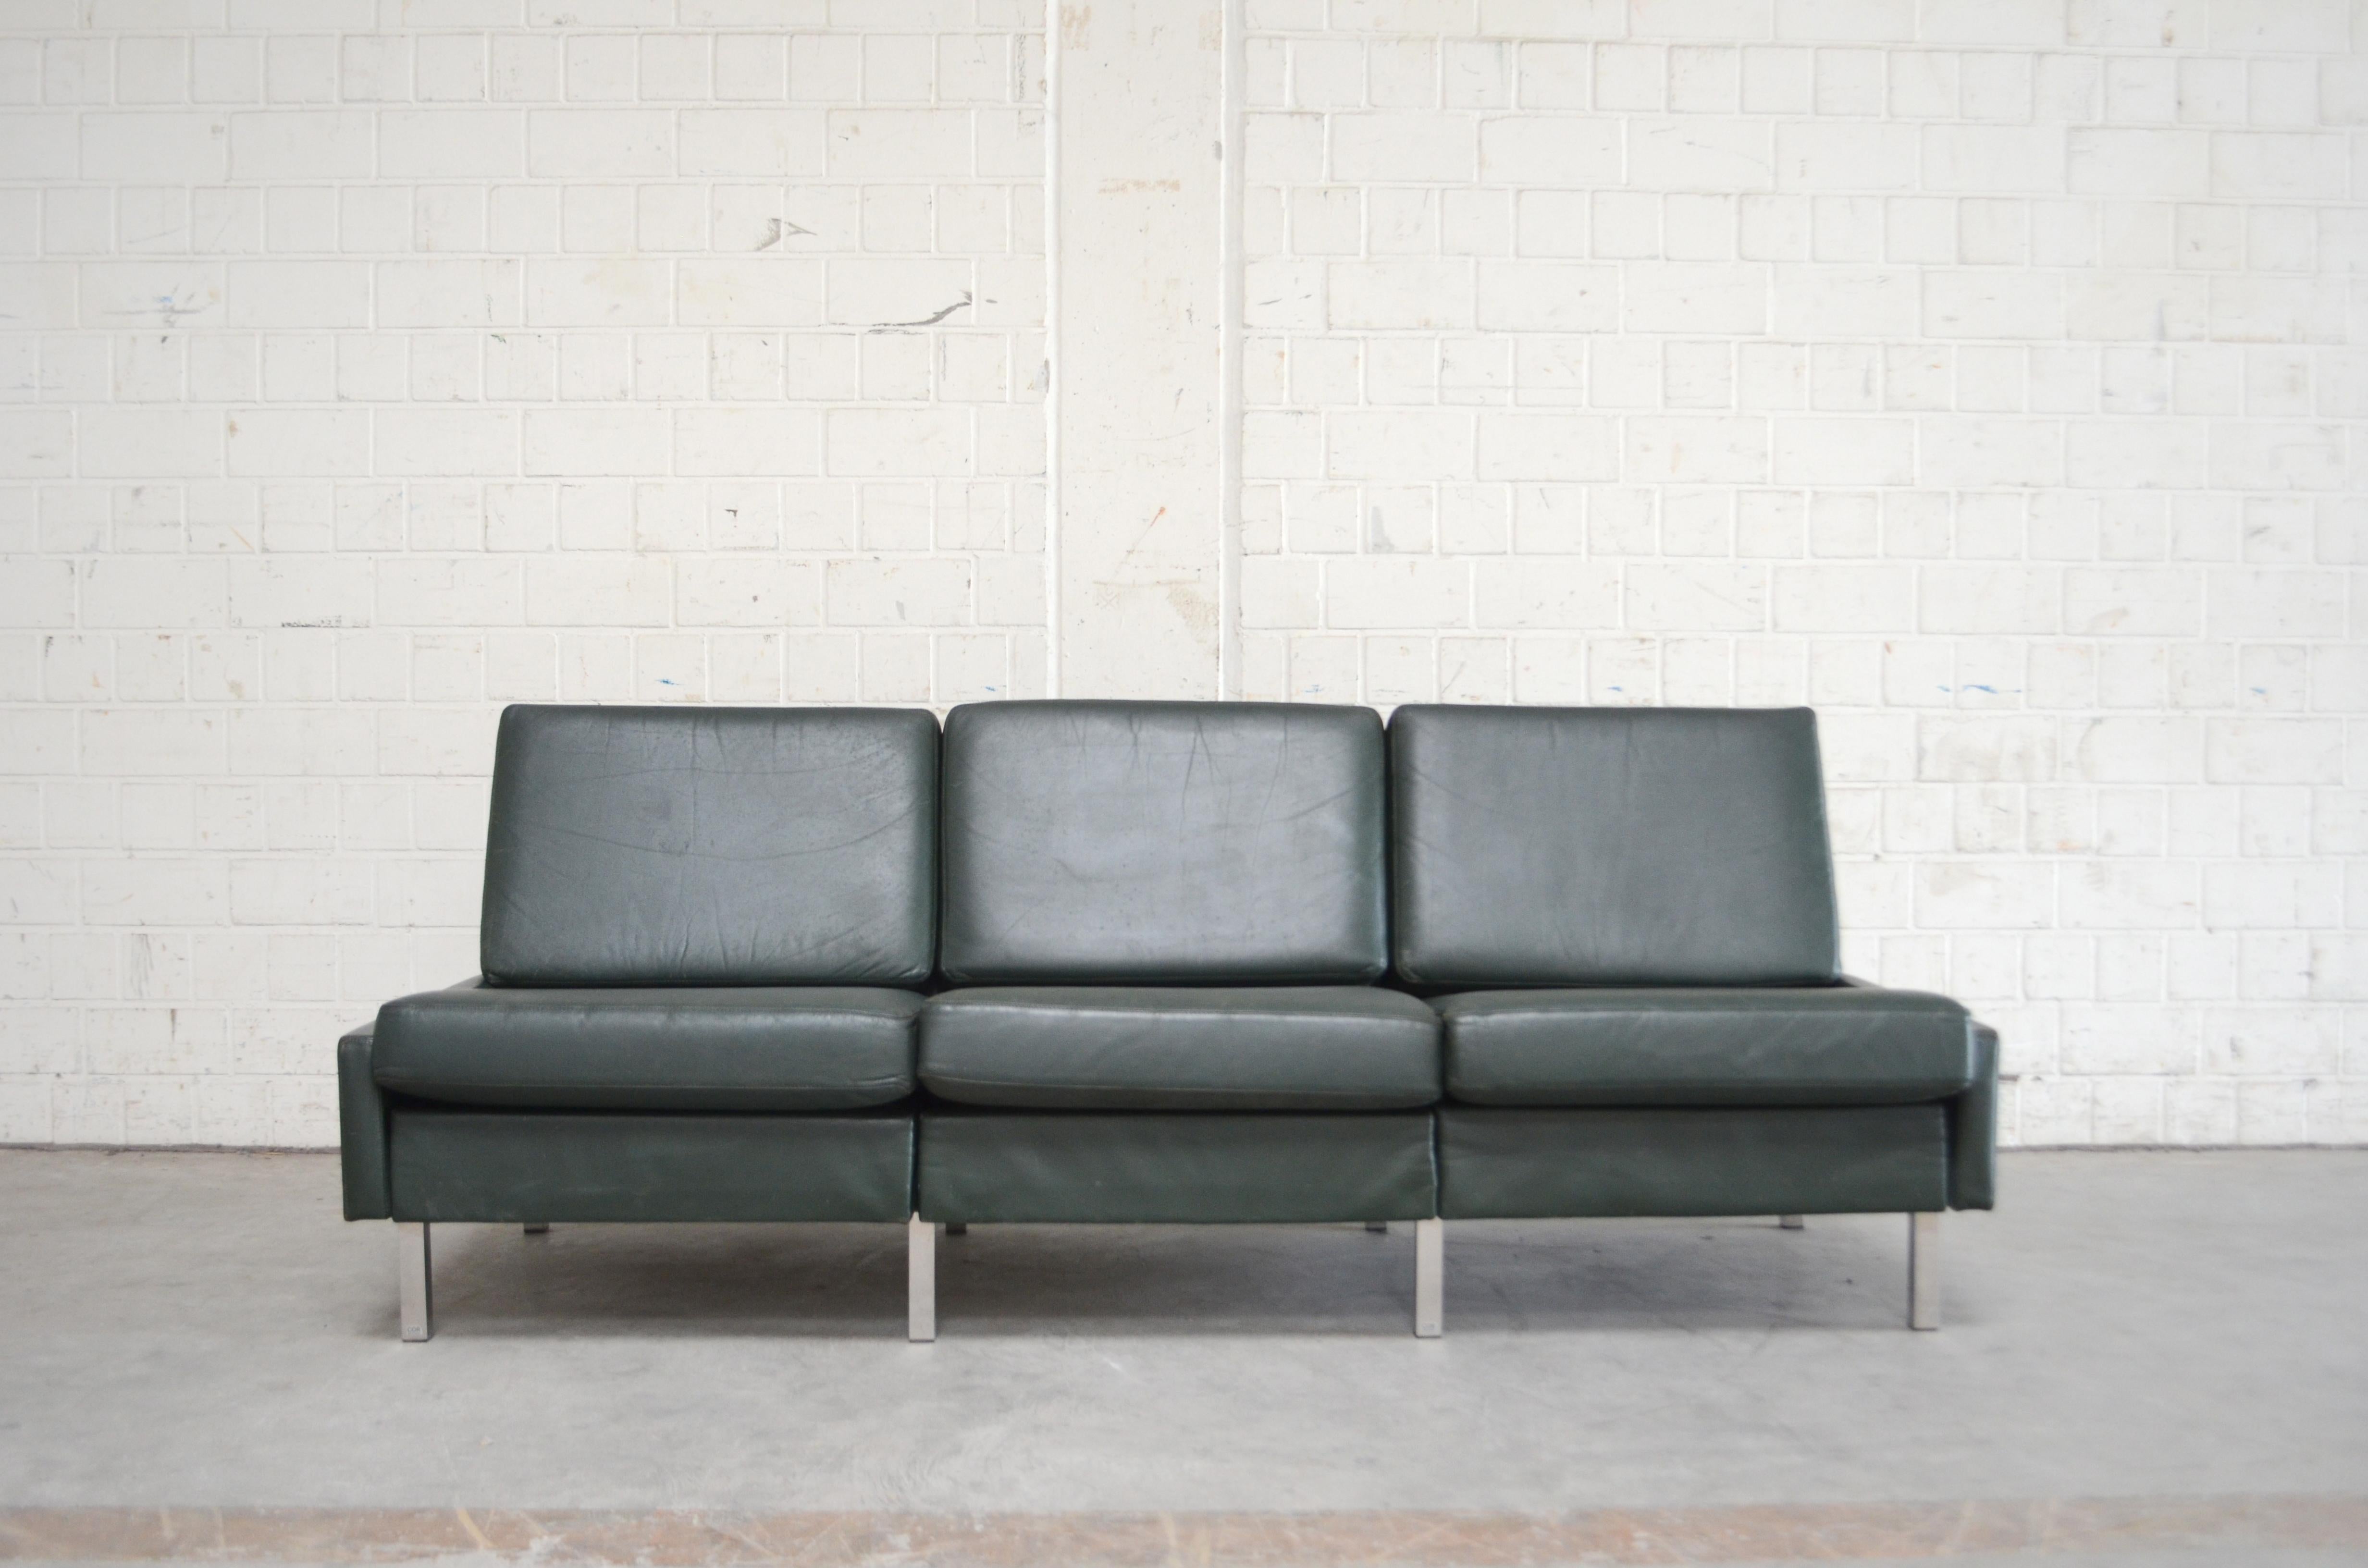 COR leather sofa model Conseta from the 1960s.
Green leather and chrome feet.
Design by Friedrich Wilhelm Möller.
